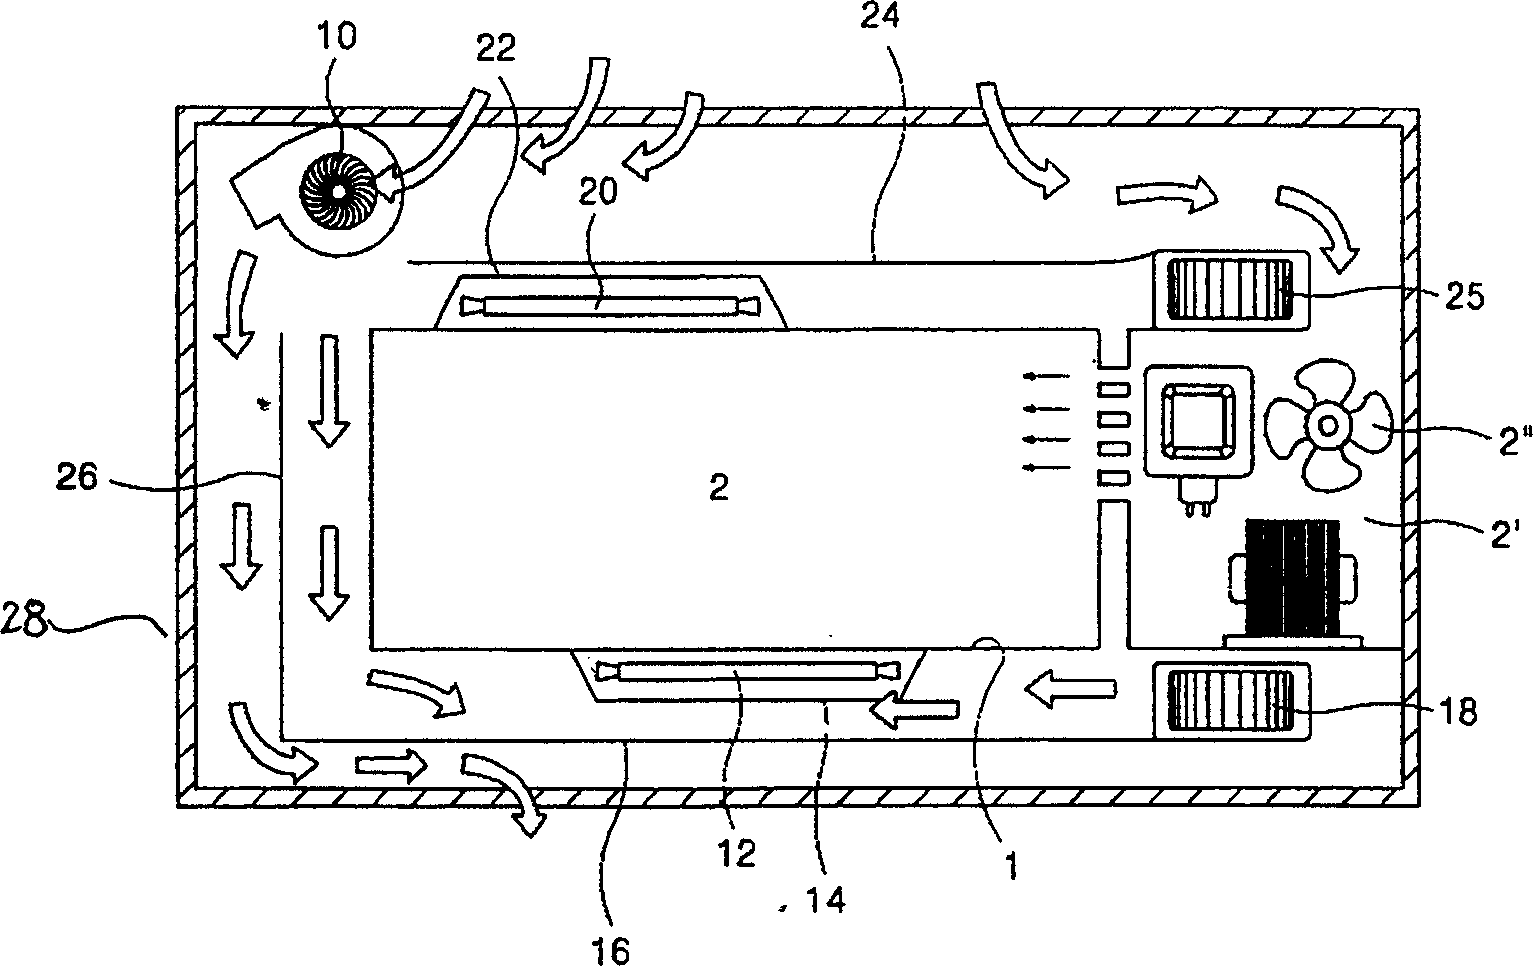 Air flow system for microwave oven